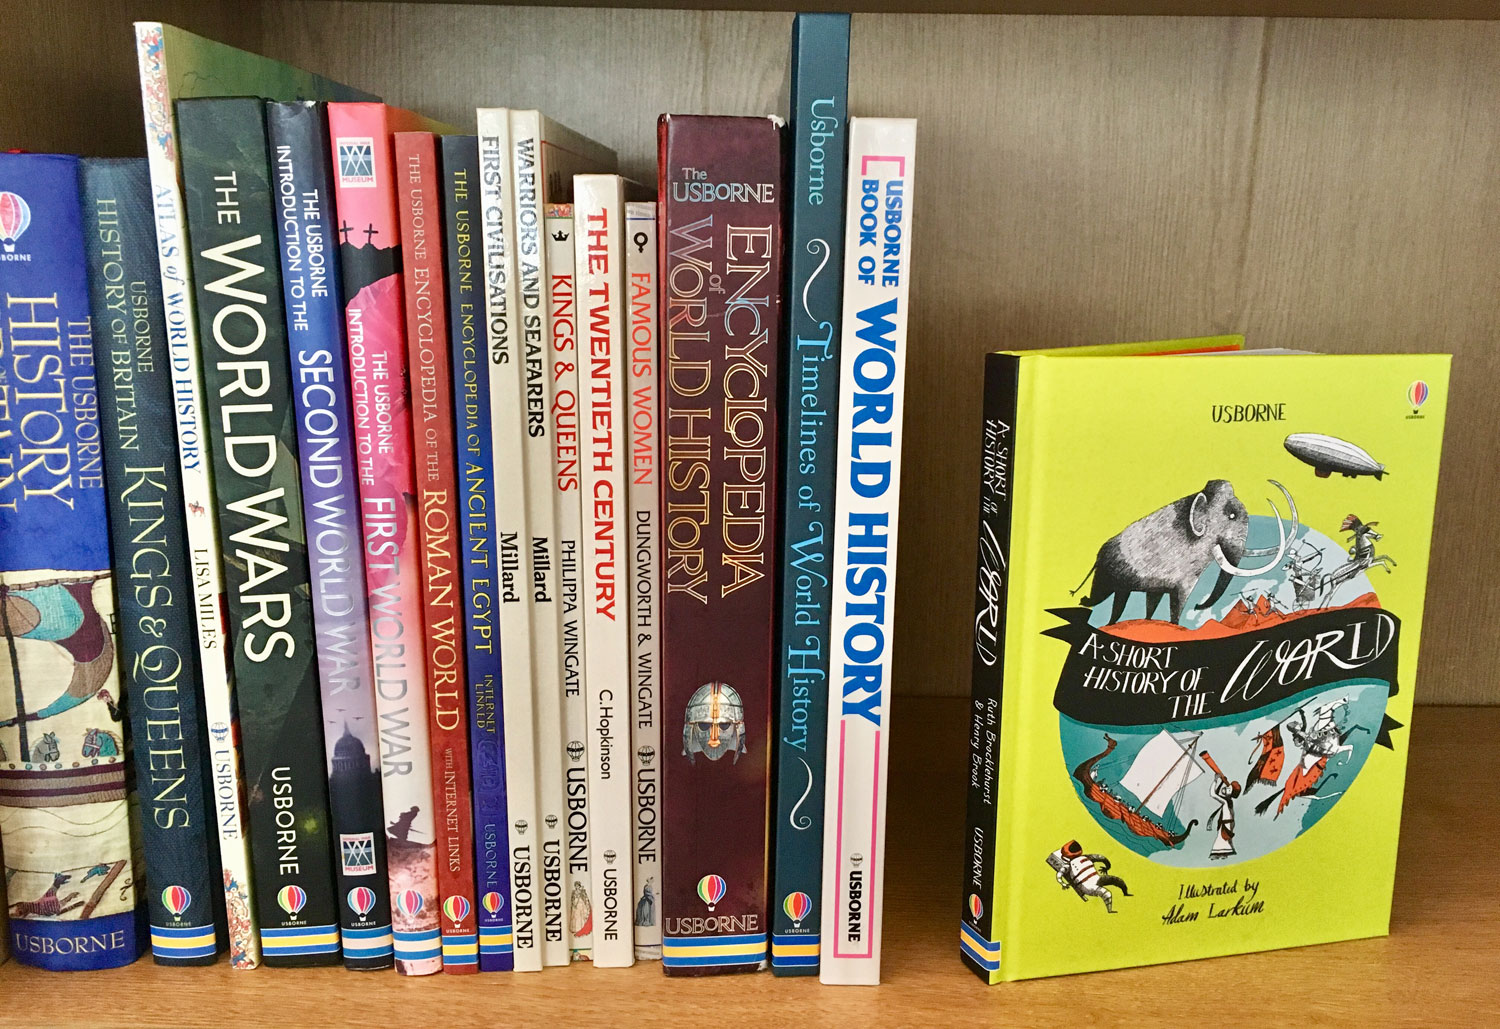 A Short History of the World alongside some of Usborne's large format history books